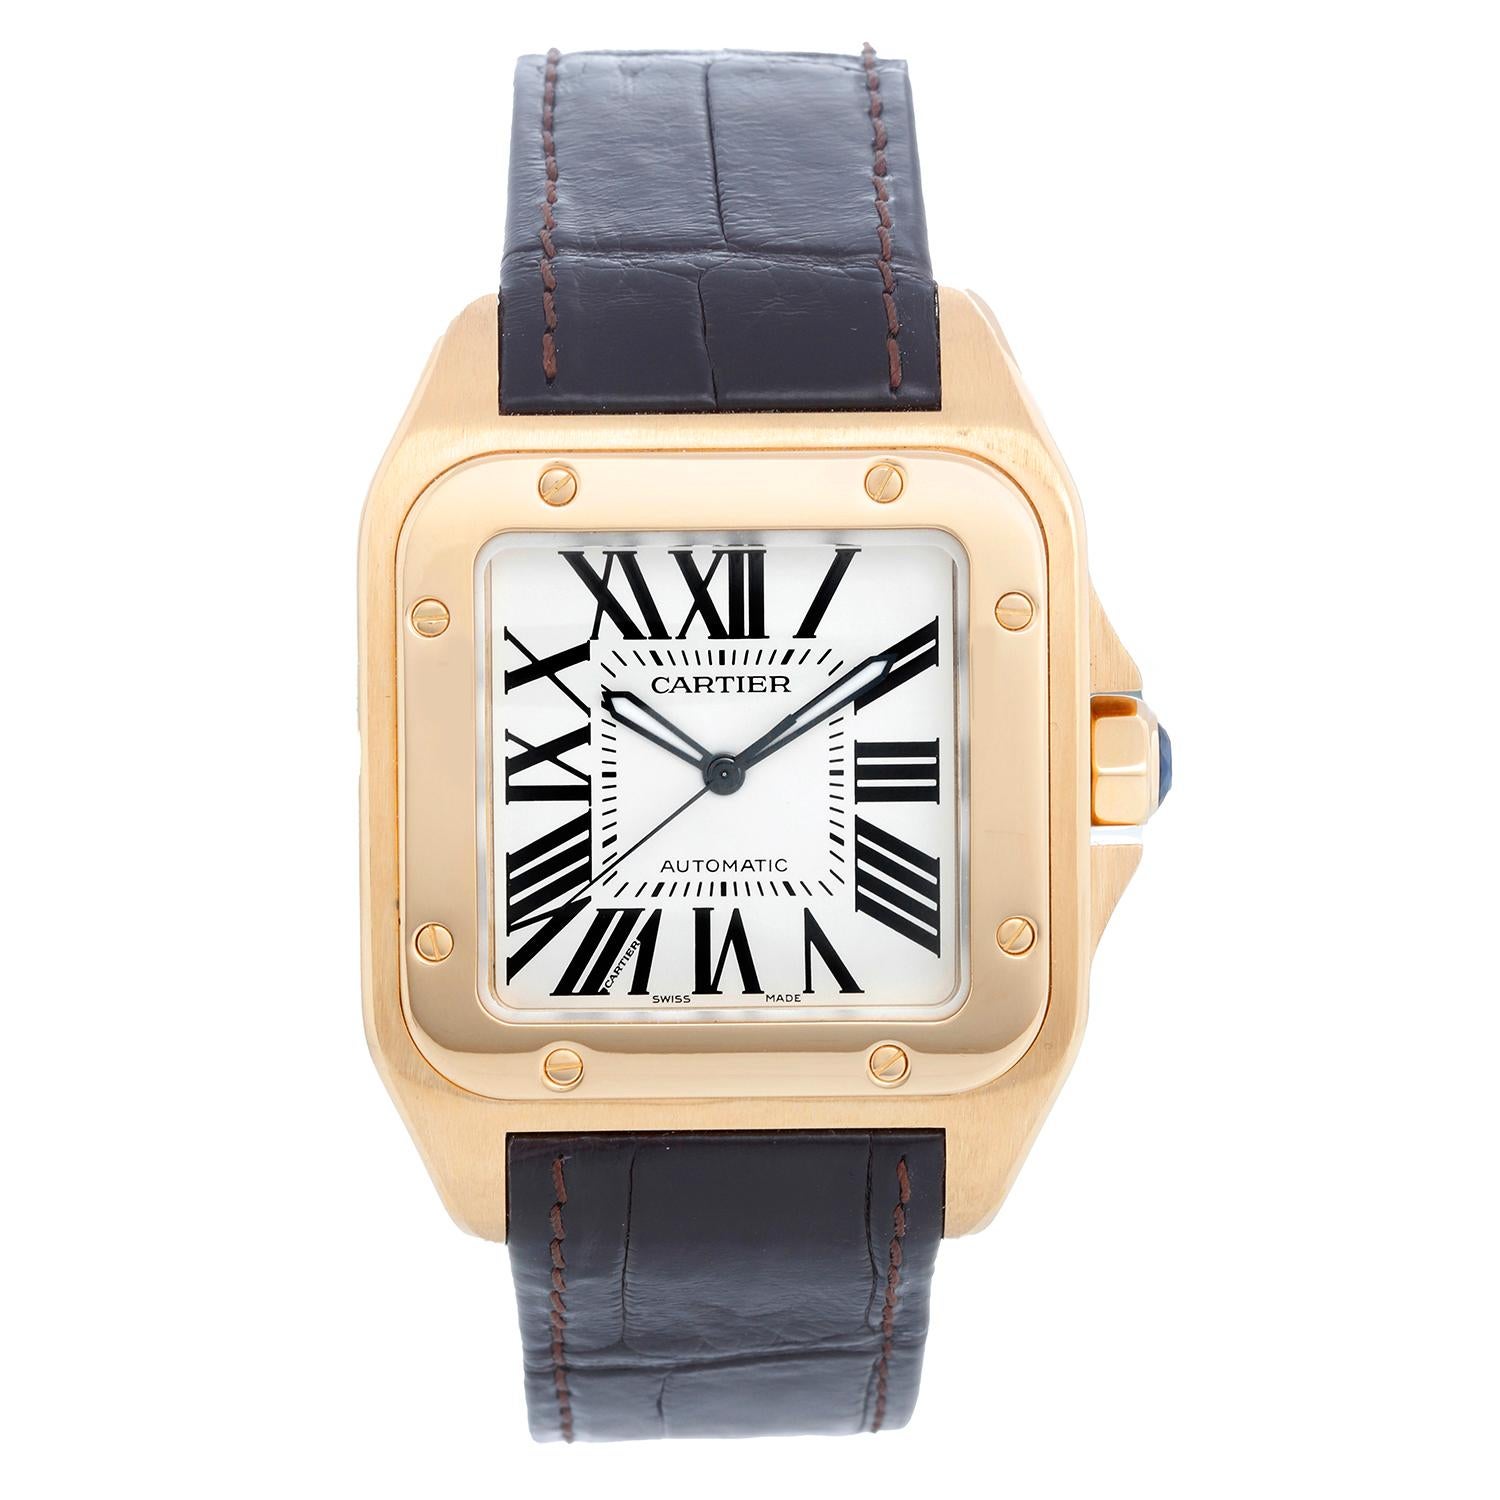 Cartier Santos 100 18K Yellow Gold Men's Watch Ref 2657 W20071Y1 -  Automatic winding . 18K Yellow gold  ( 39 x 51 mm). White dial with Roman numerals . Brown Cartier Bracelet with Cartier deployant clasp . Pre-owned with Cartier Box.